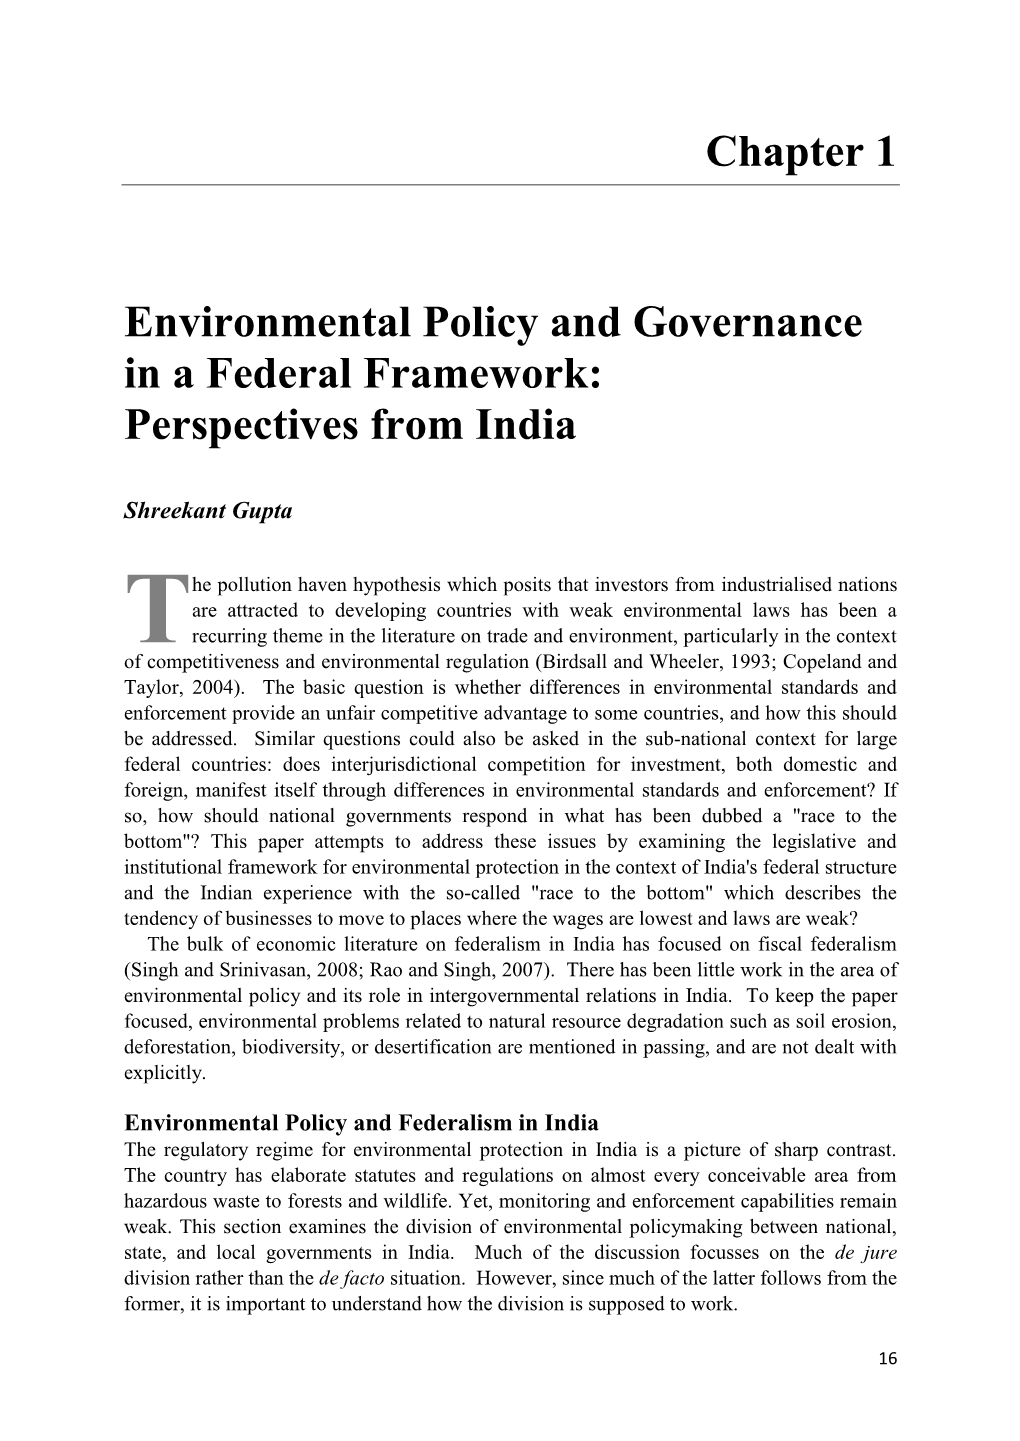 Environmental Policy and Governance in a Federal Framework: Perspectives from India